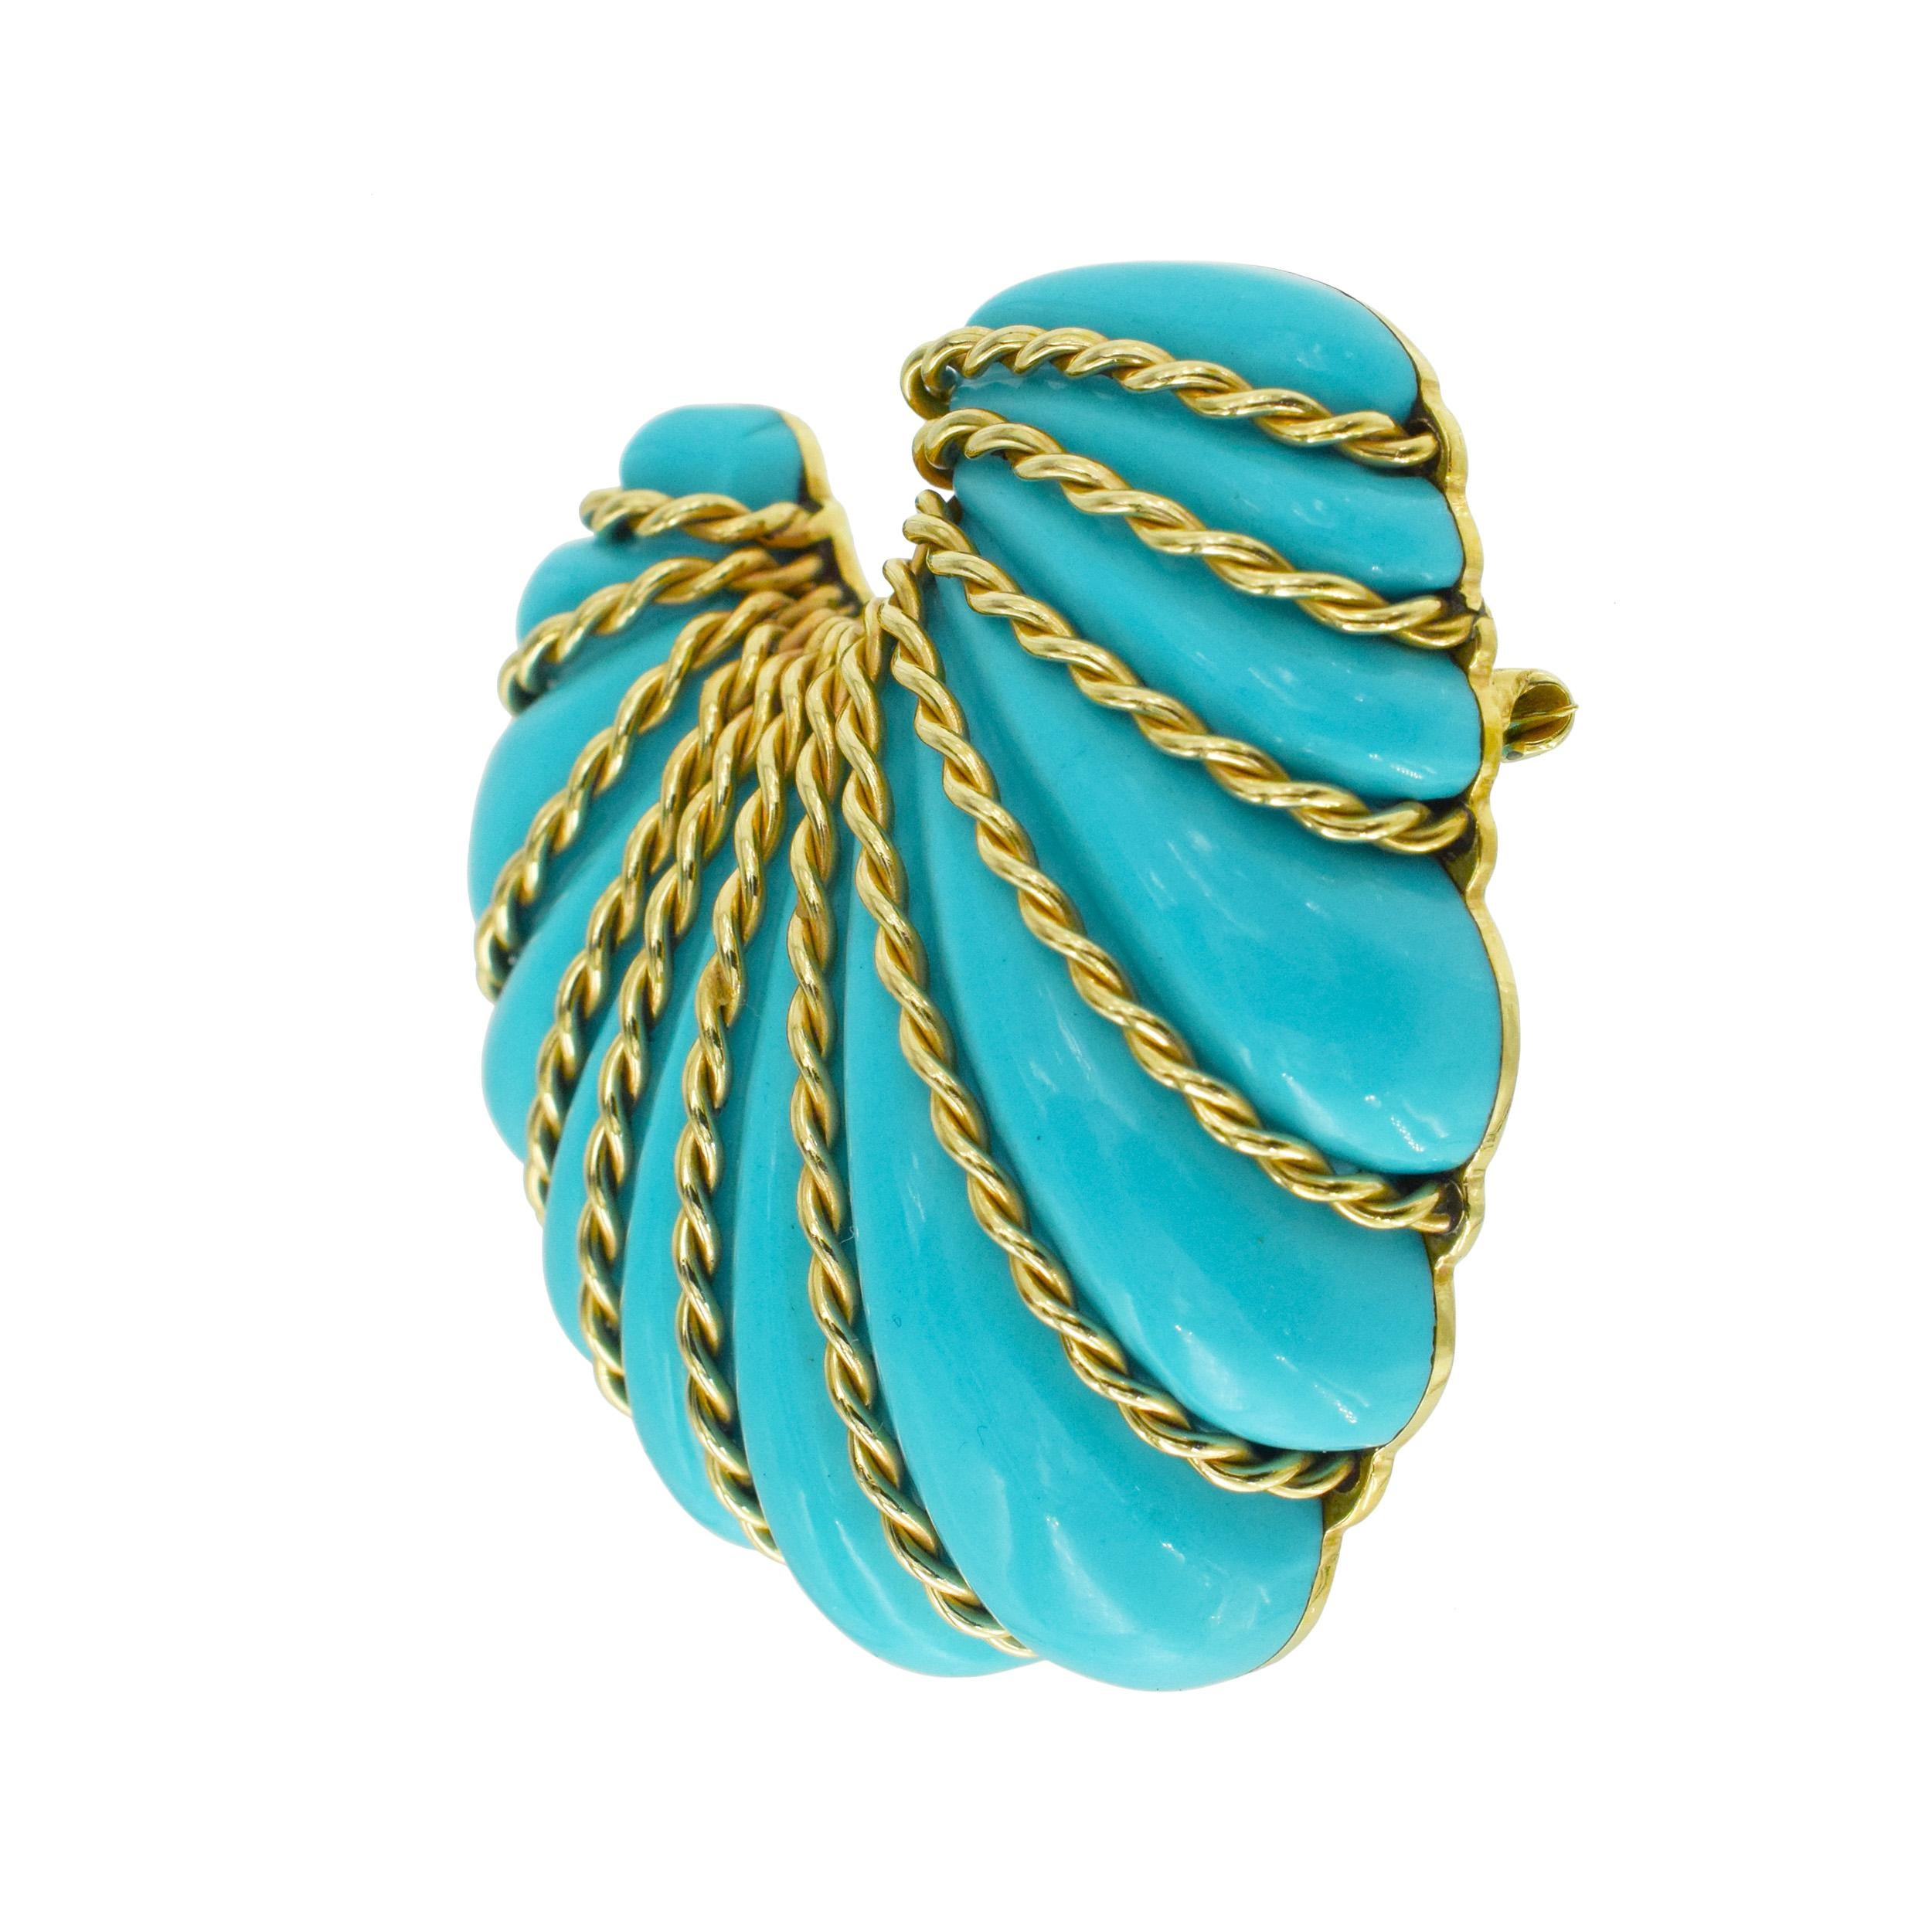 Seaman Schepps Pair of Gold and Turquoise Composite Shell Brooches This pair of      brooches has a shell motif of turquoise composite shells with 14k yellow gold twisted rope set around the turquoise. Both brooches signed Seaman Schepps.